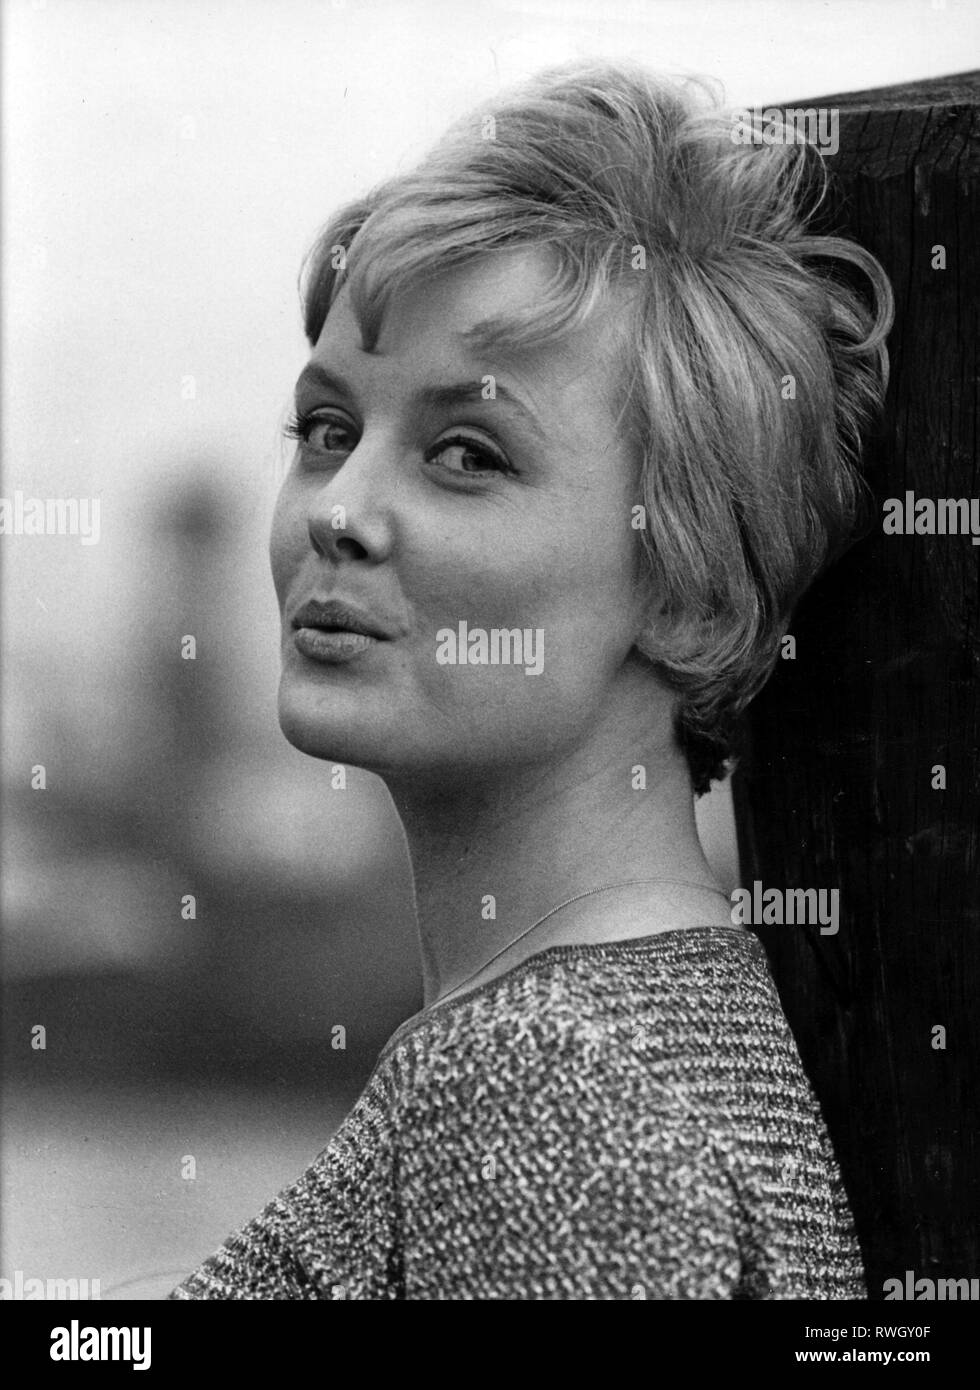 Brueck, Inge, * 12.11.1936, German singer and actress, portrait, 1960s, Additional-Rights-Clearance-Info-Not-Available Stock Photo